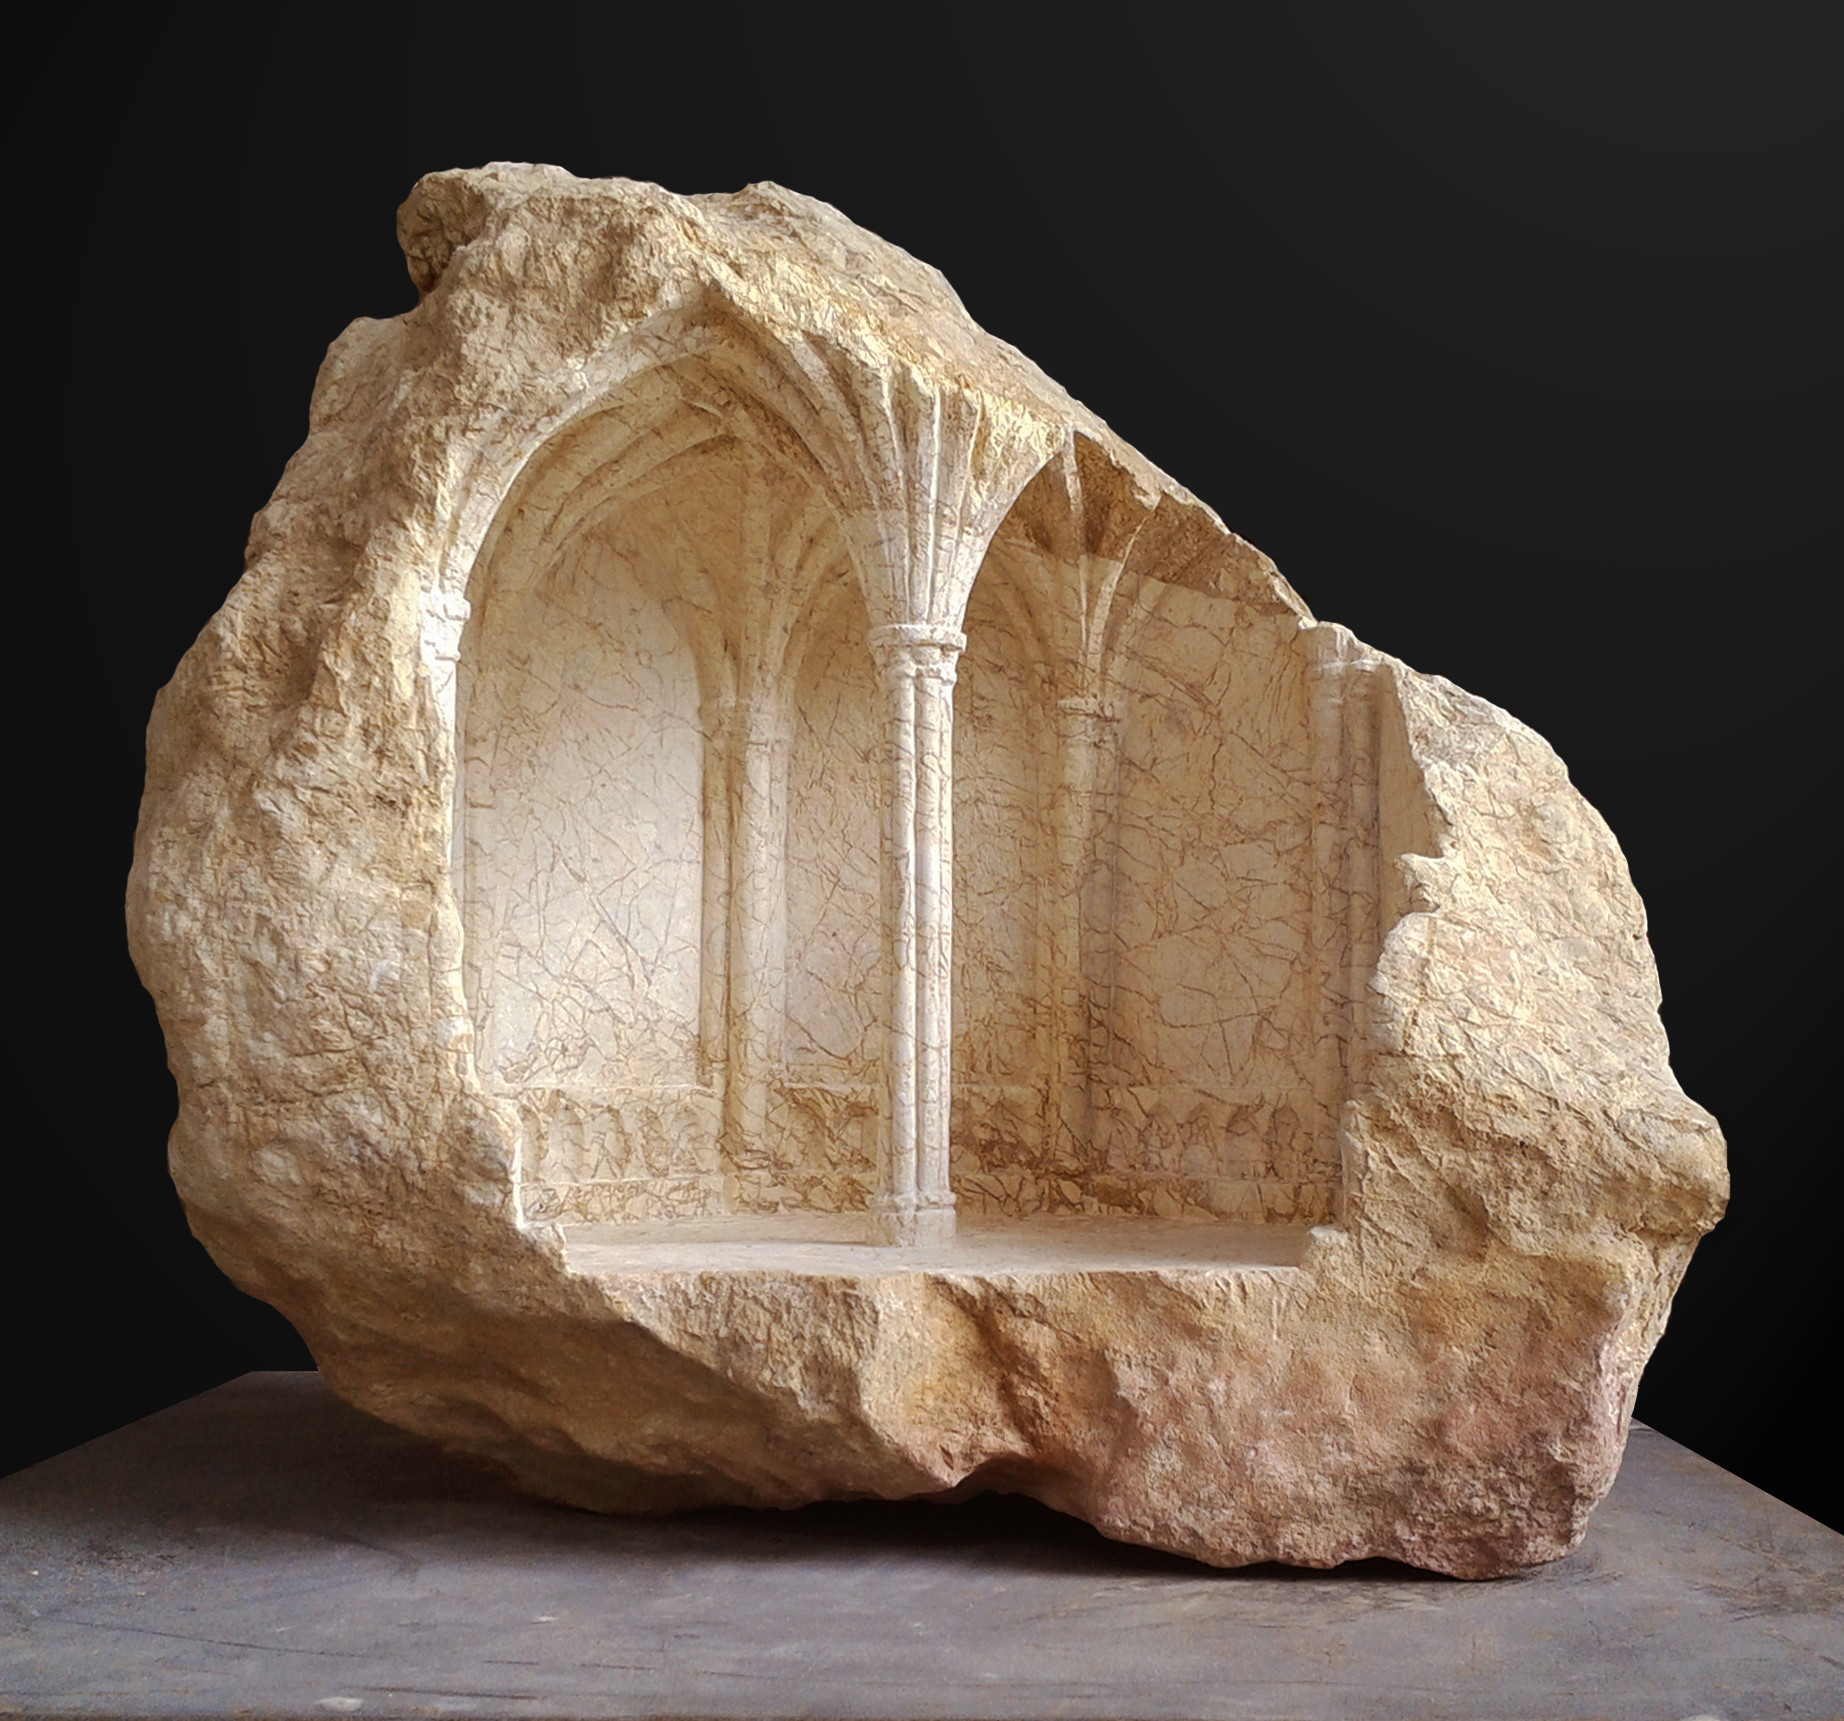 Miniature Spaces Carved From Stone | ArchDaily